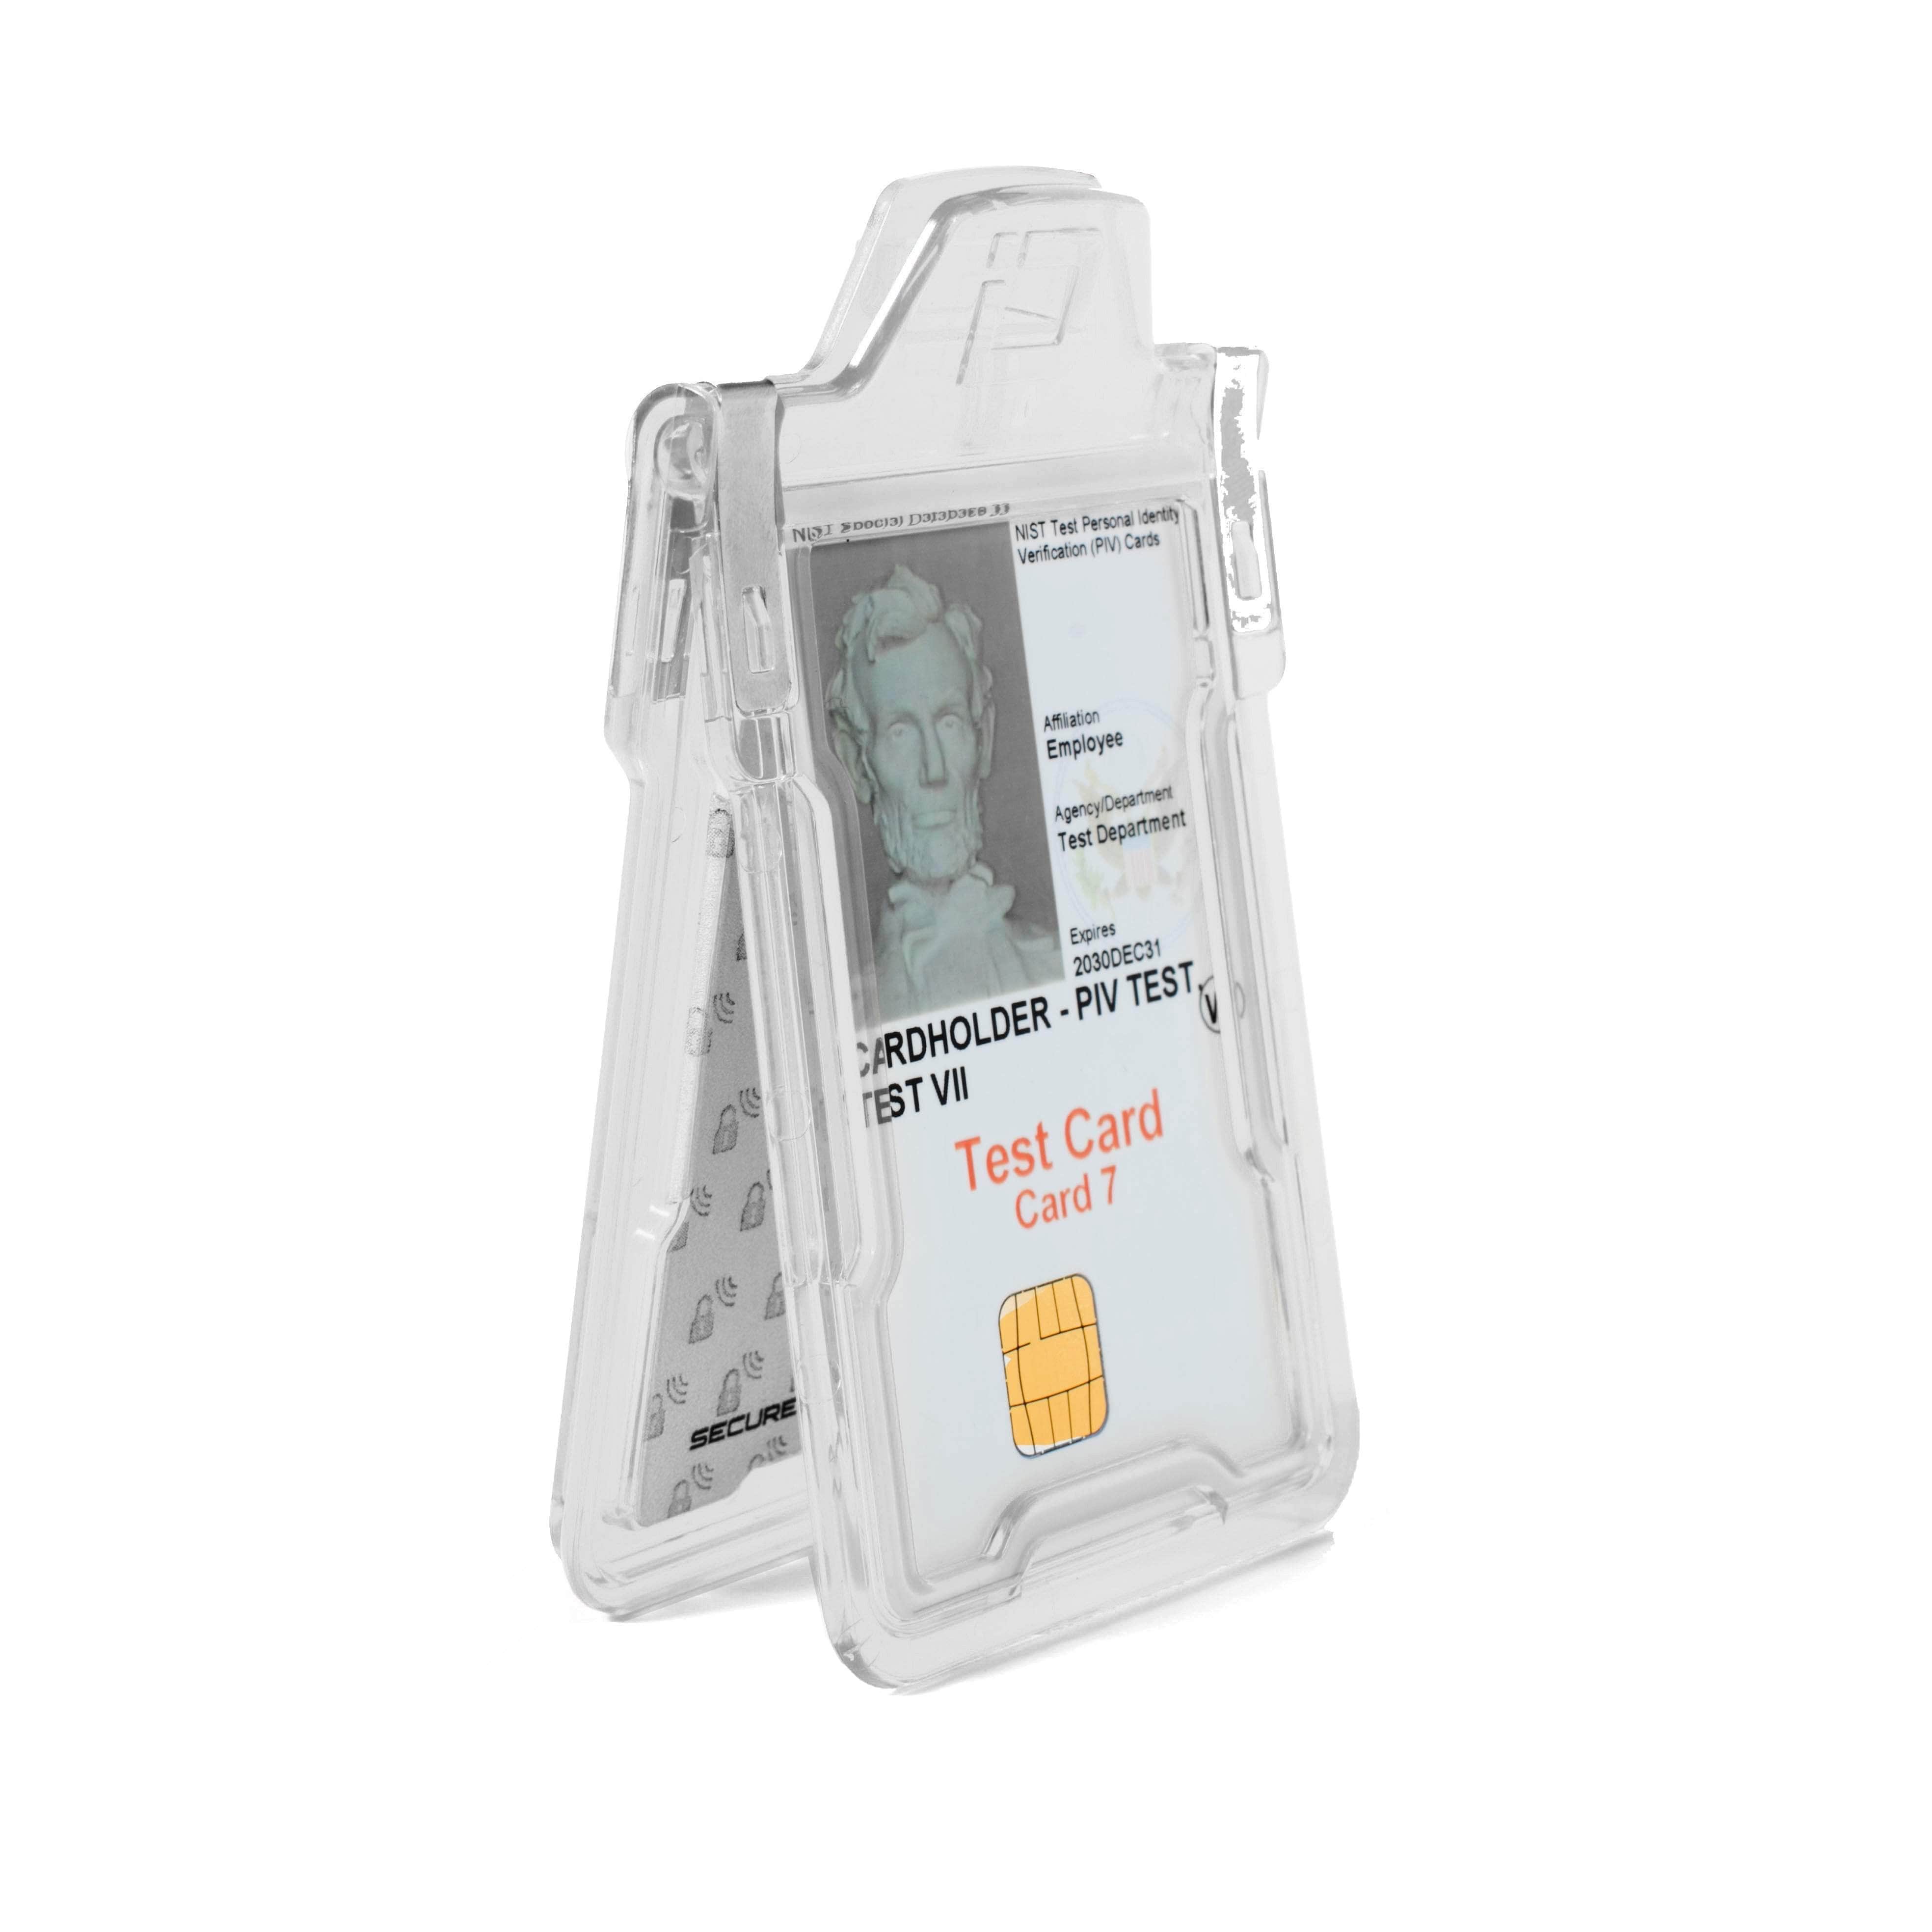 ID Stronghold Badgeholder BloxProx Clear Secure Badge Holder with BloxProx™ - Protects 125Khz HID Prox 1 Card Holder